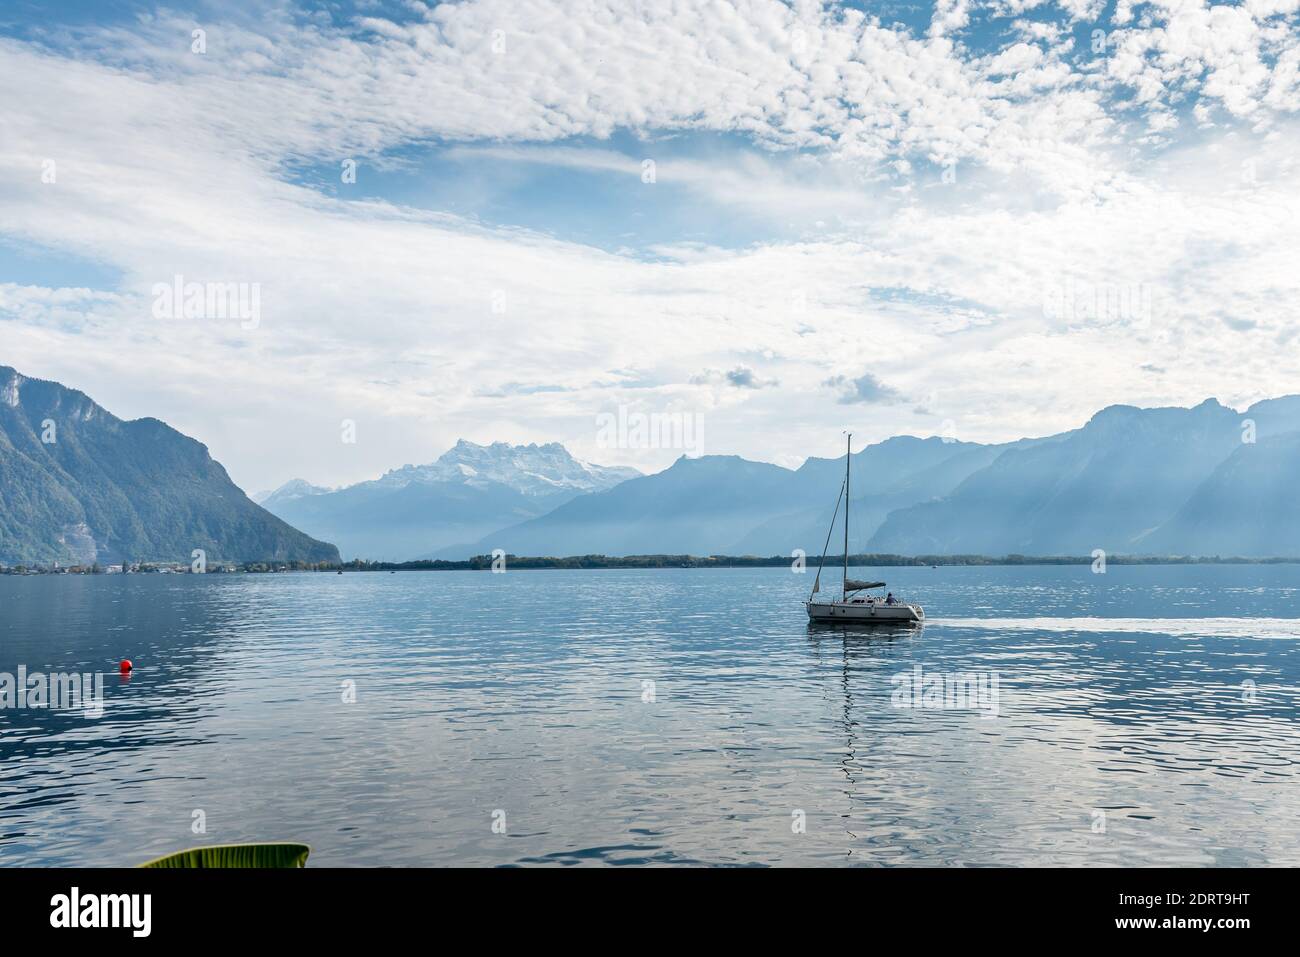 Alpine lake with the calm water with a boat sailing surrounded by snowy peaks. Montreux in Geneve lake Stock Photo